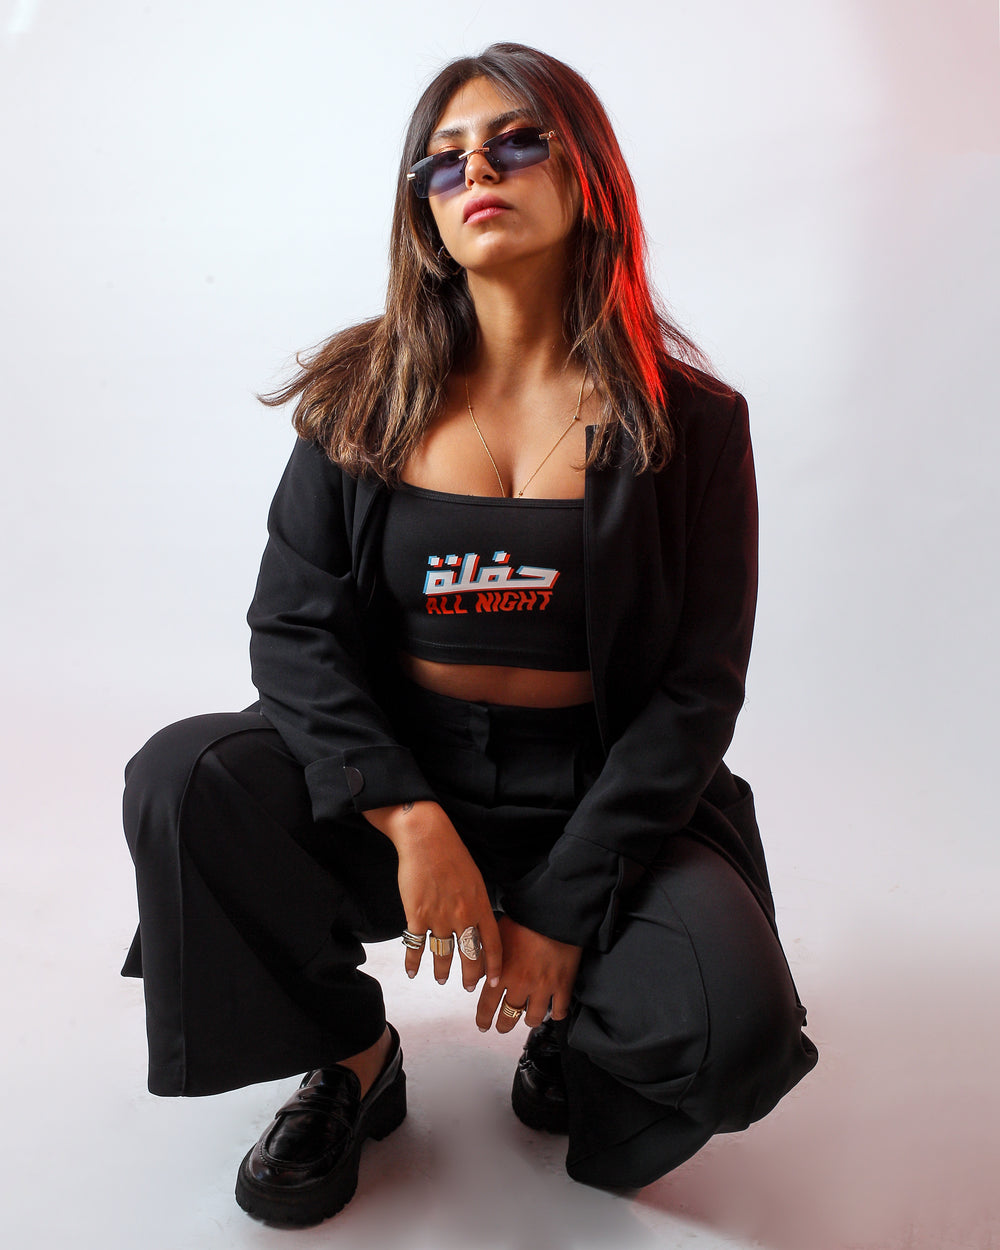 Young adult female wearing black Bralette with Hafle all Night written in Arabic and English حفلة All Night and printed in glitch silkscreen in the center of the bralette along with black trousers, black shoes, a black jacket and sunglasses.